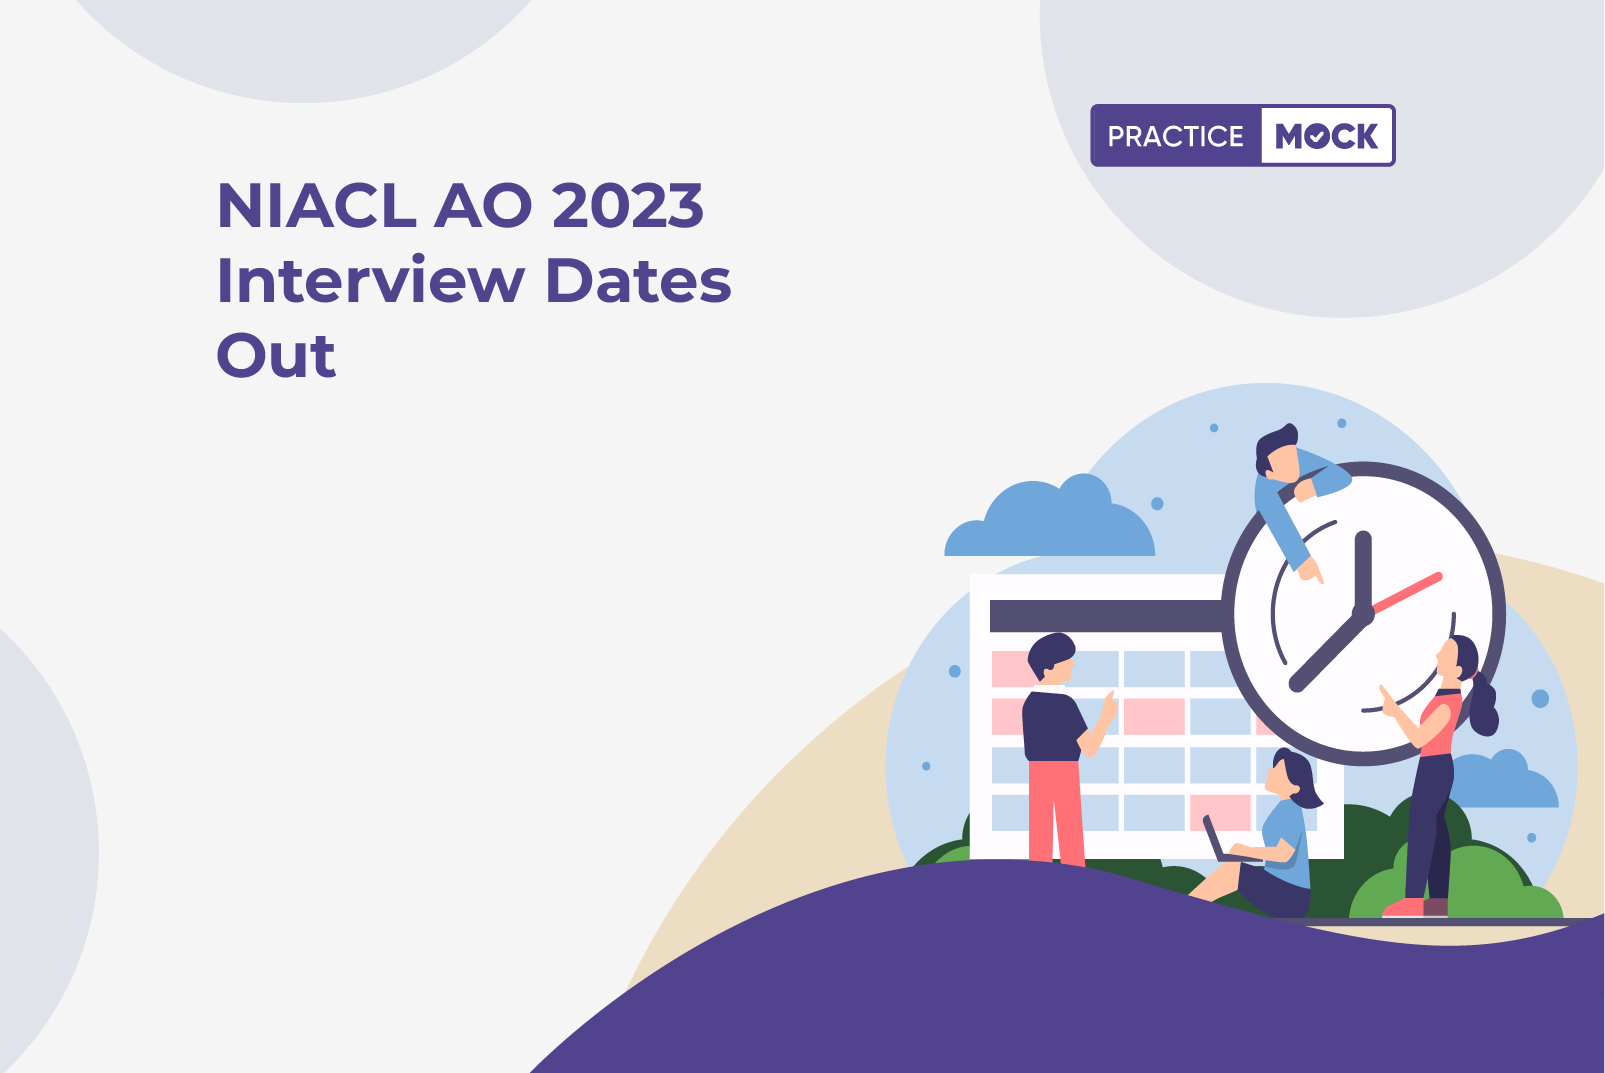 NIACL AO 2023 Interview Dates Out